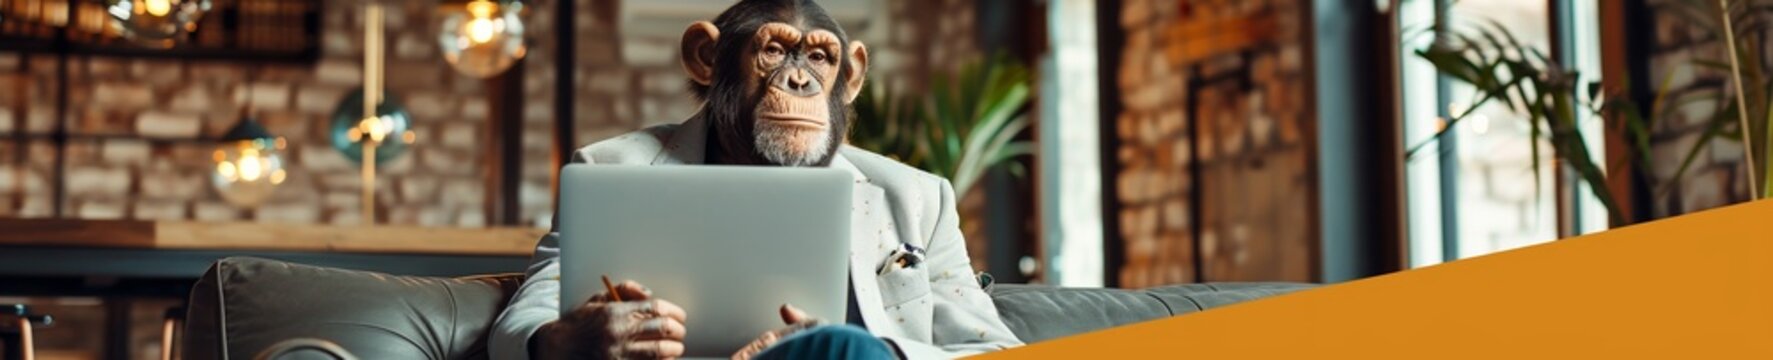 A charismatic monkey in business attire working on a laptop in a creative office space